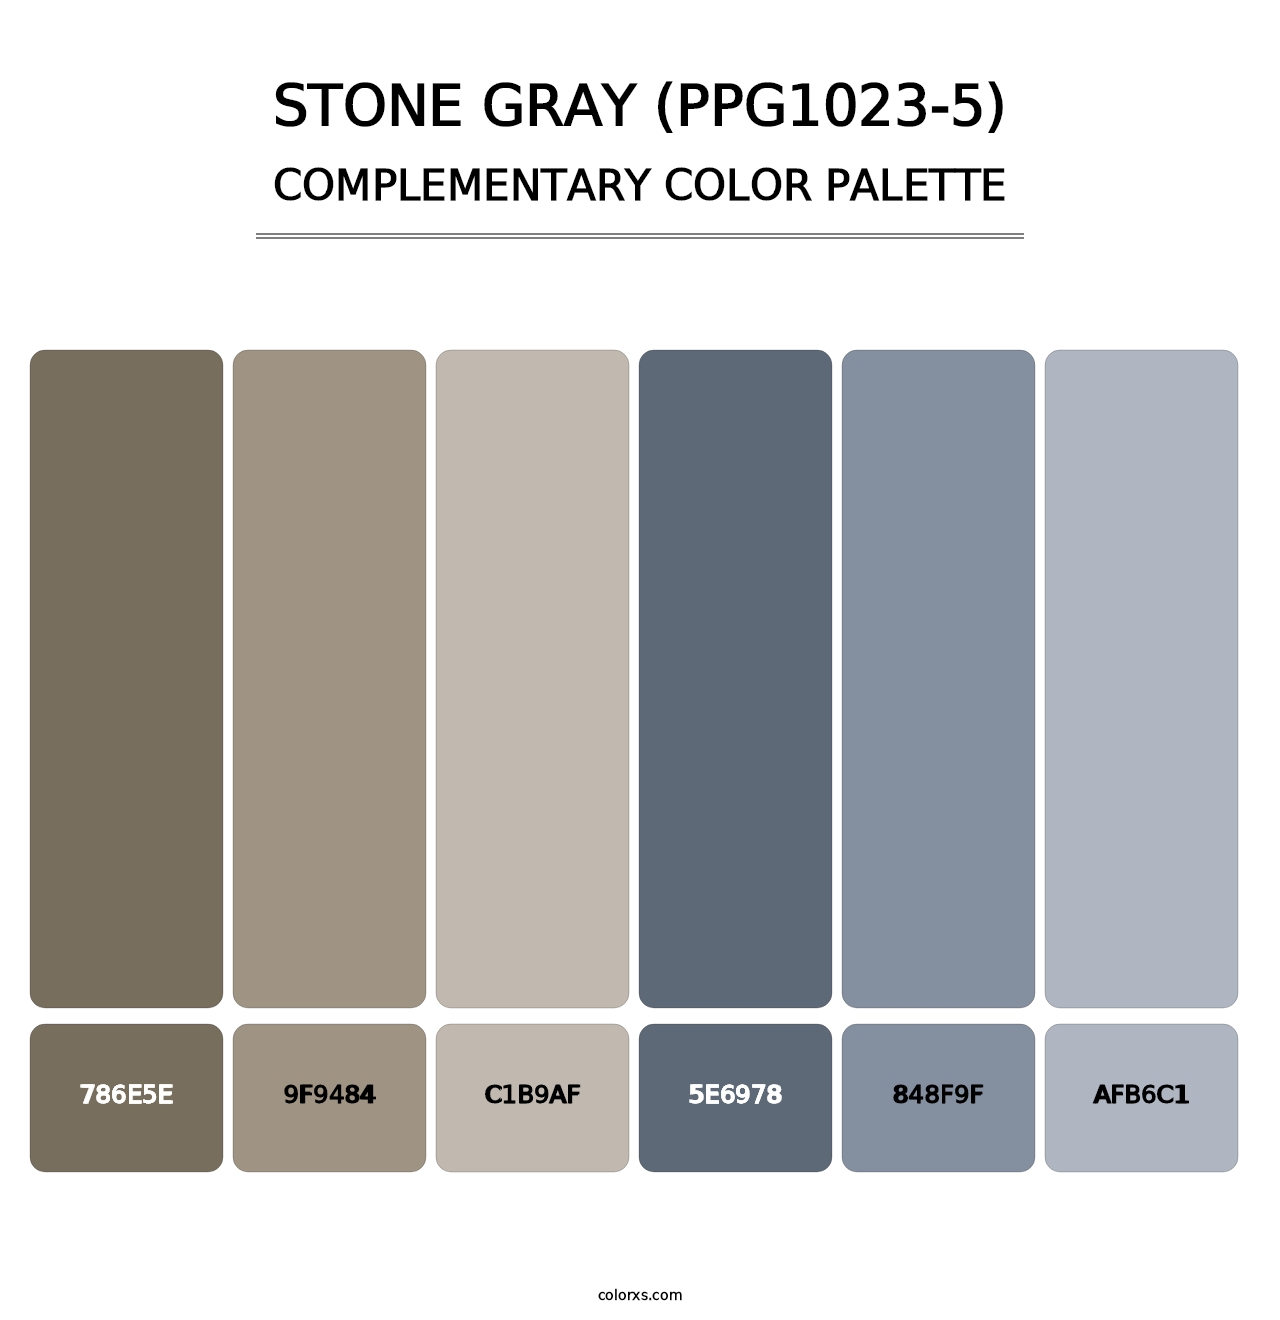 Stone Gray (PPG1023-5) - Complementary Color Palette